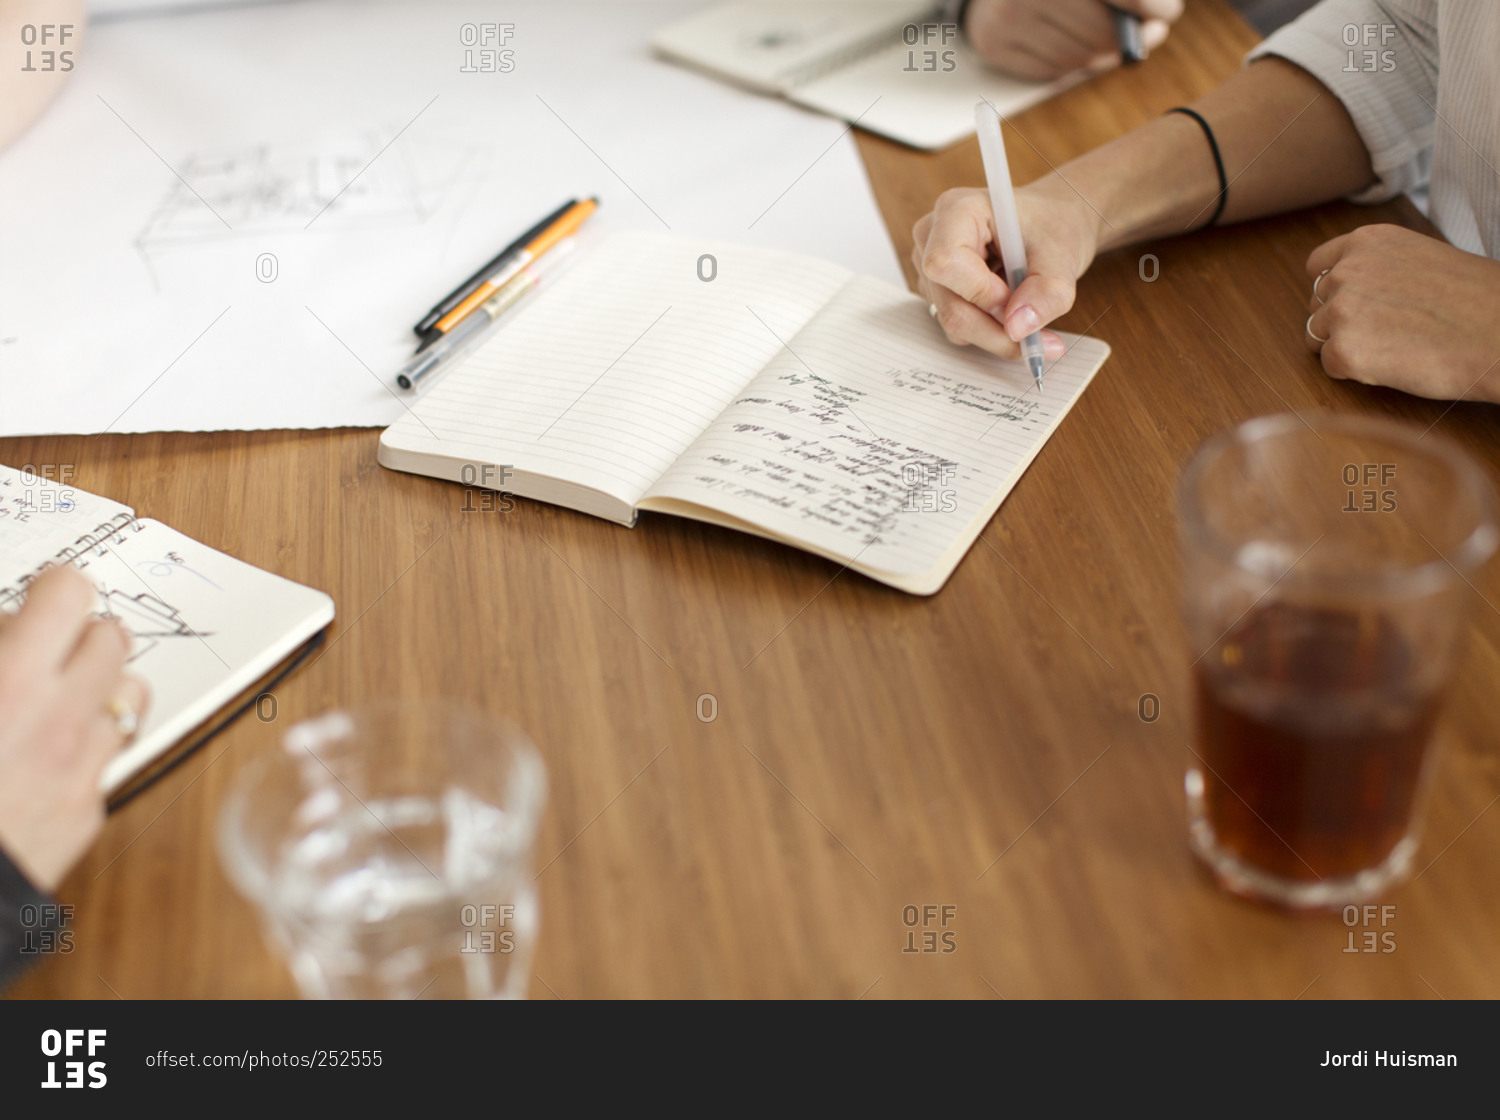 Four people taking notes and drawing during meeting